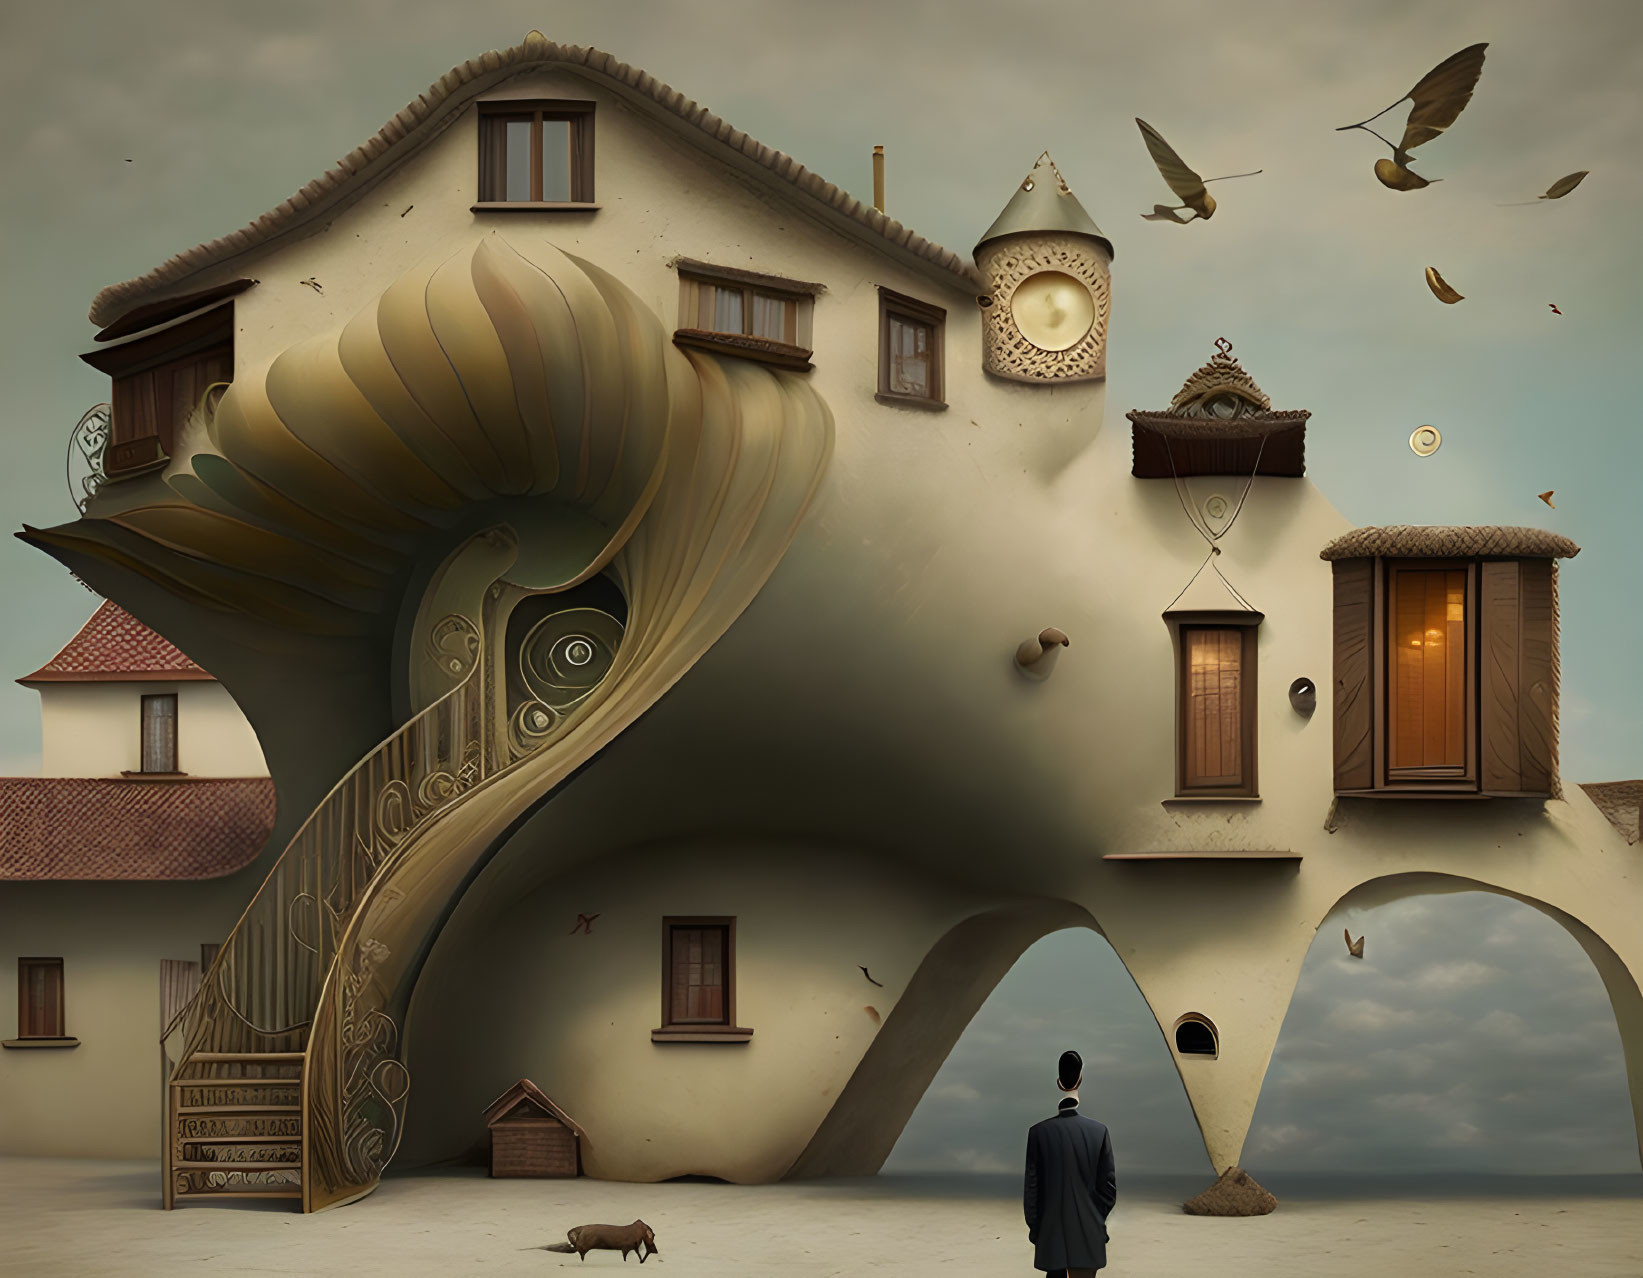 Surreal man standing by whimsical building and gramophone under dusky sky